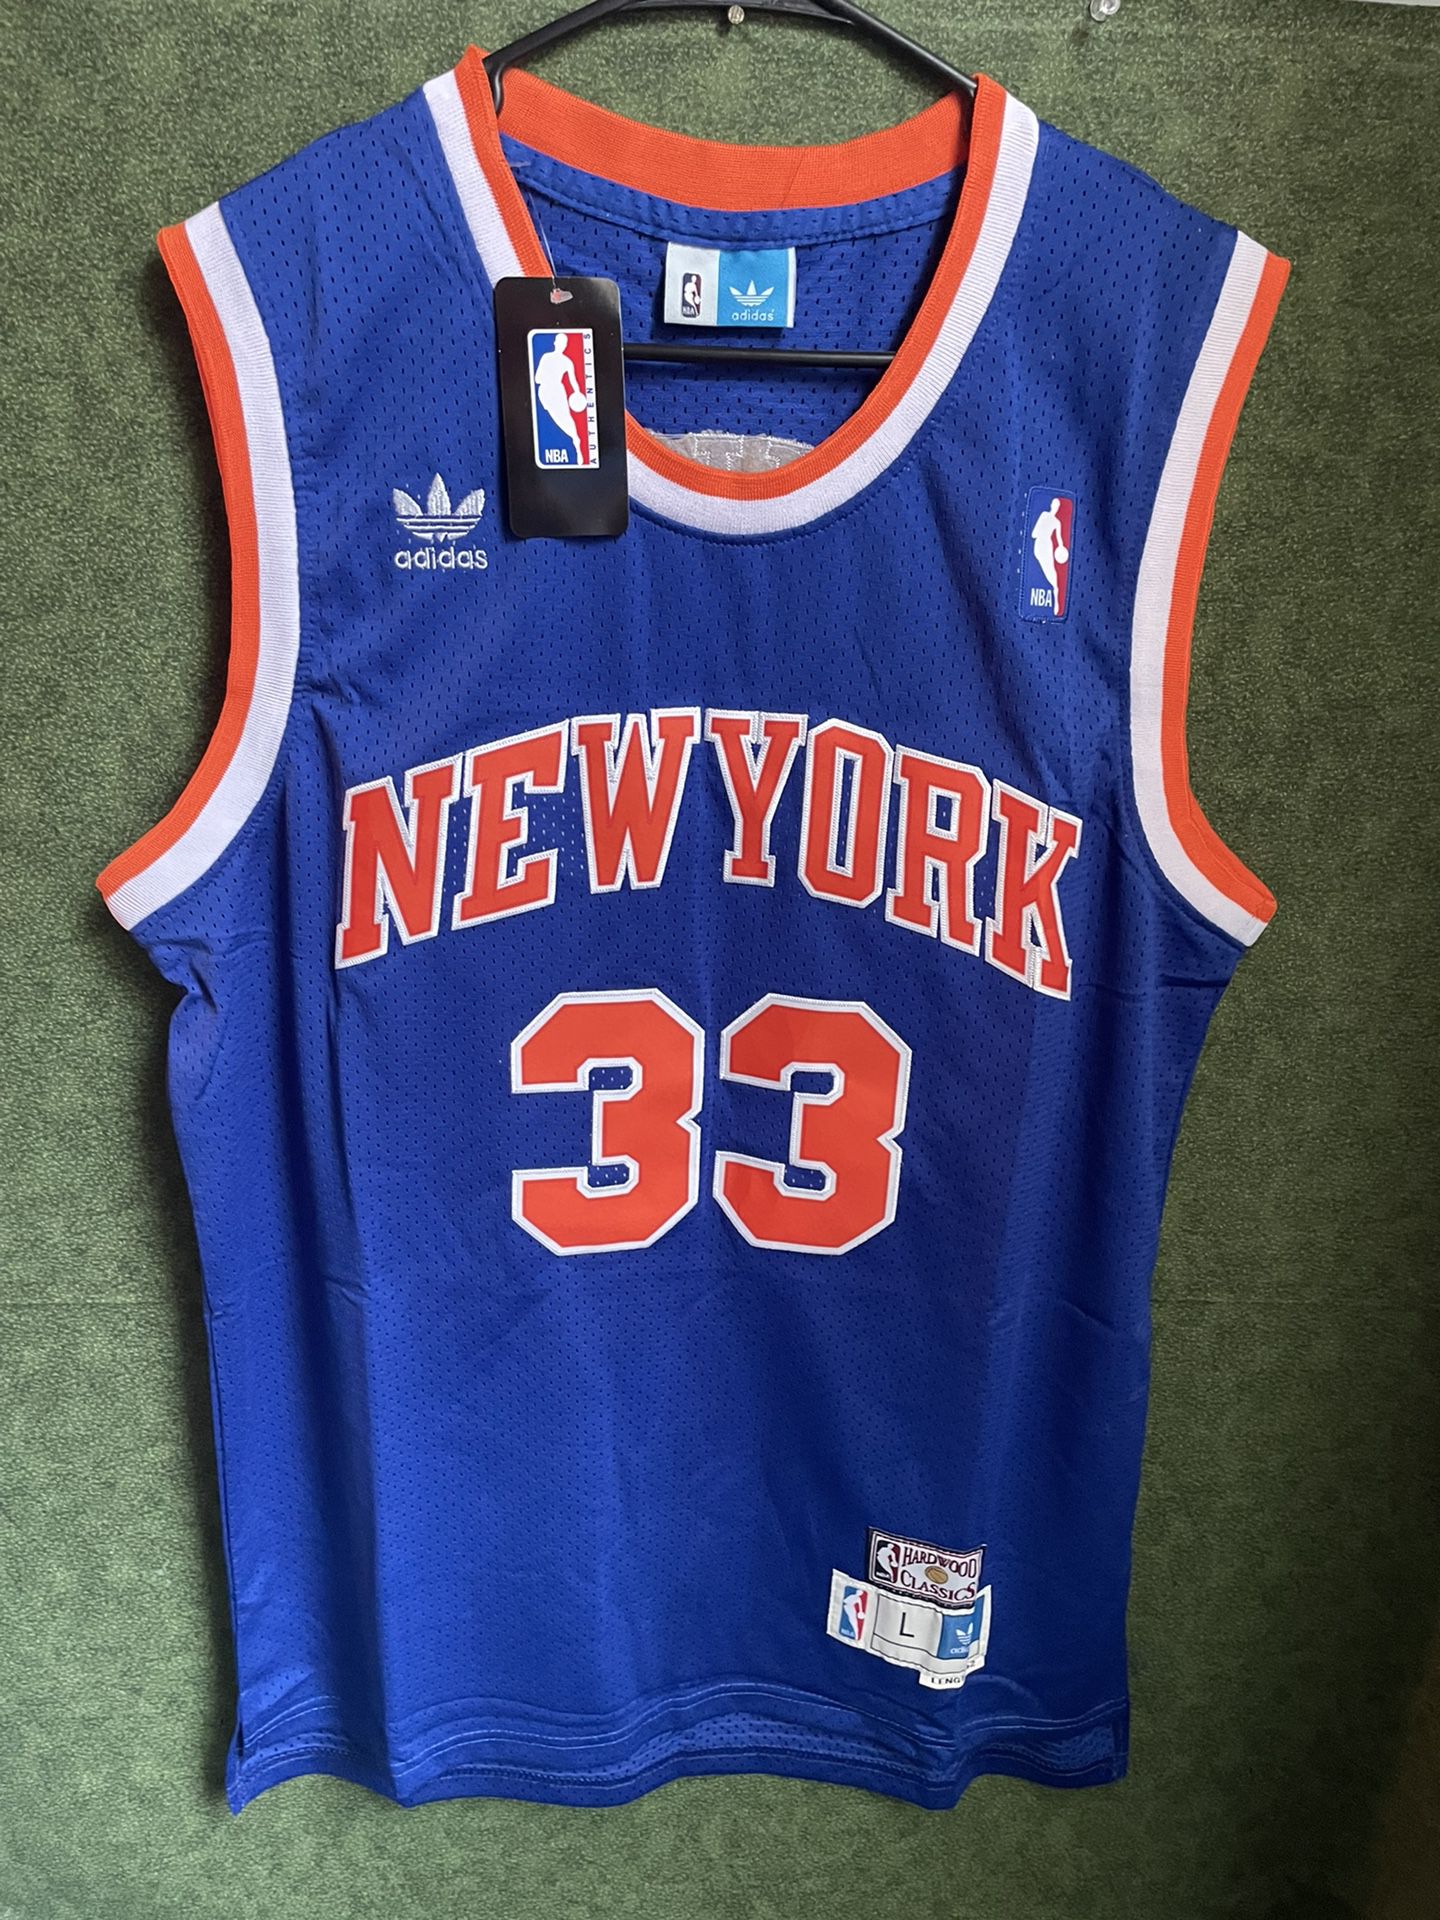 PATRICK EWING NEW YORK KNICKS VINTAGE ADIDAS JERSEY BRAND NEW WITH TAGS SIZE LARGE